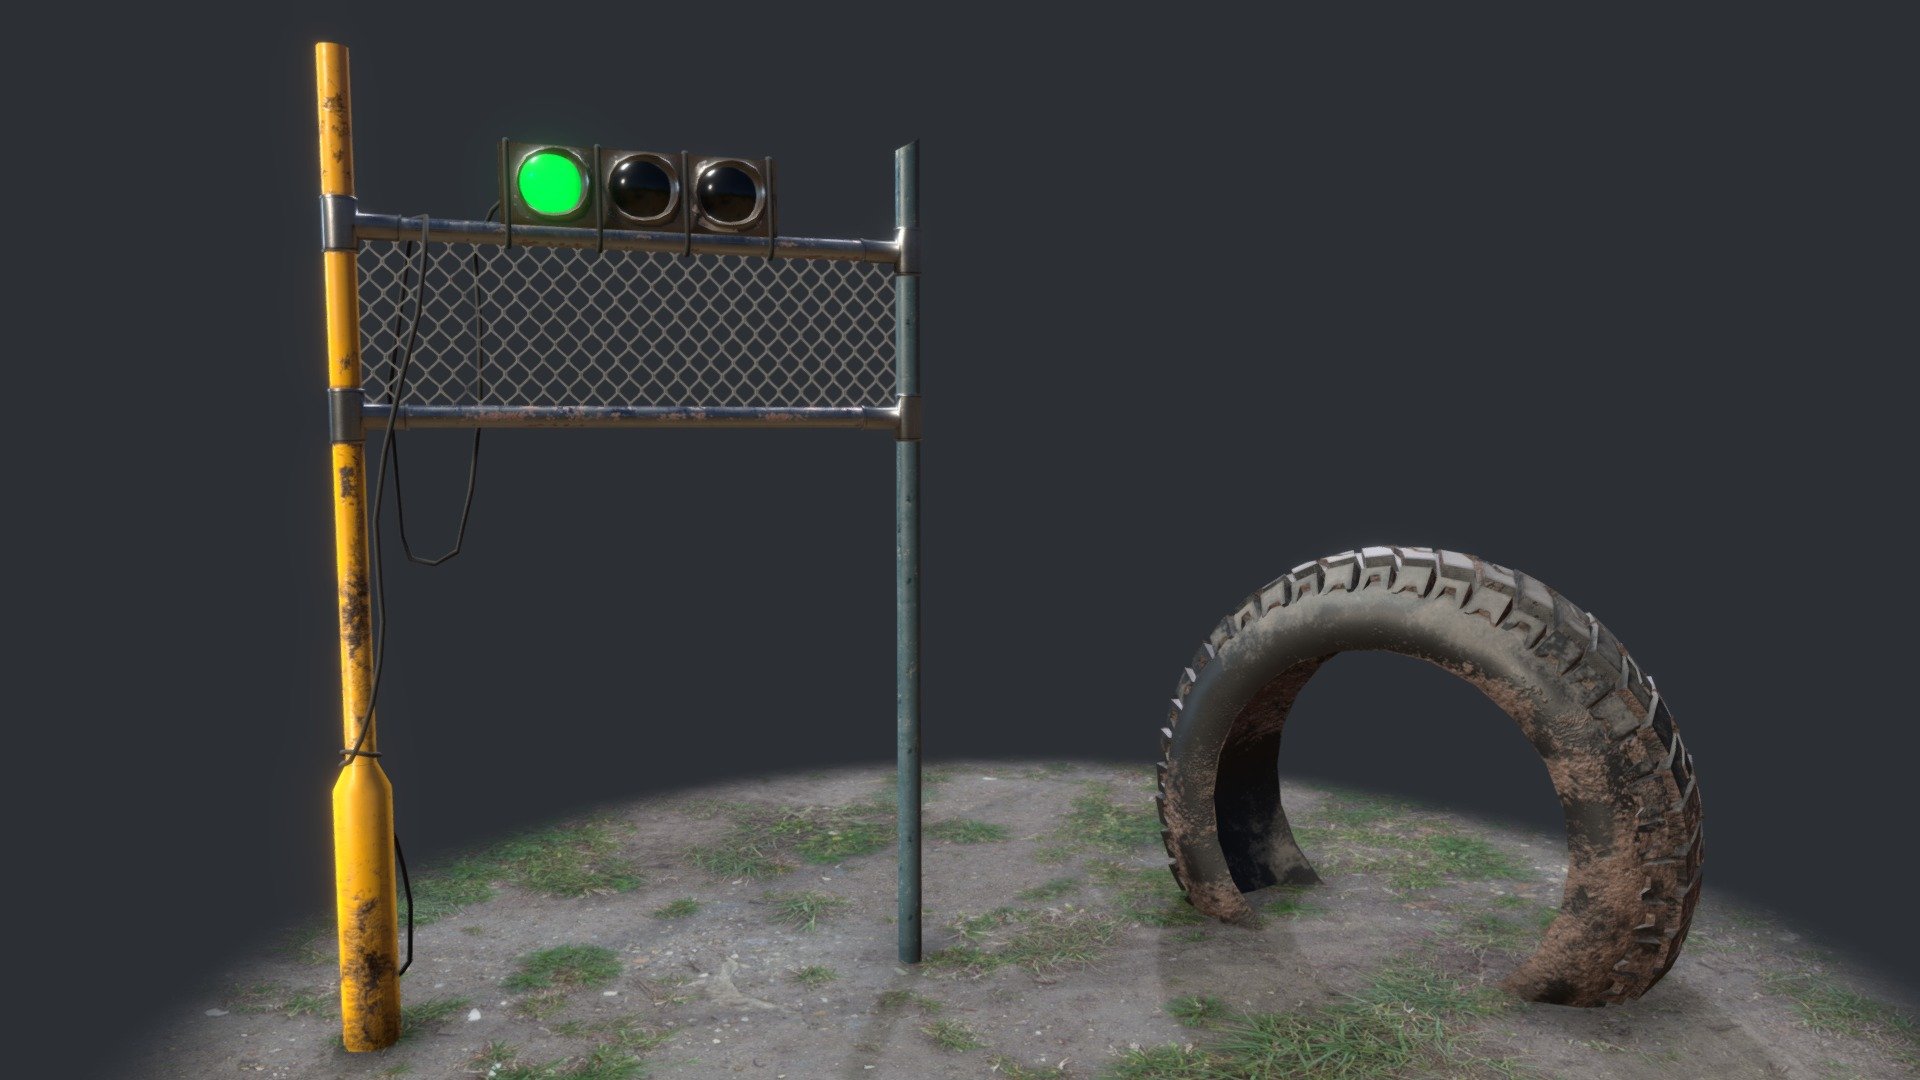 Raw and improvised obstacle course props made from junk - Checkpoint and obstacle - Download Free 3D model by Daniel Pełka (@dnplk) 3d model